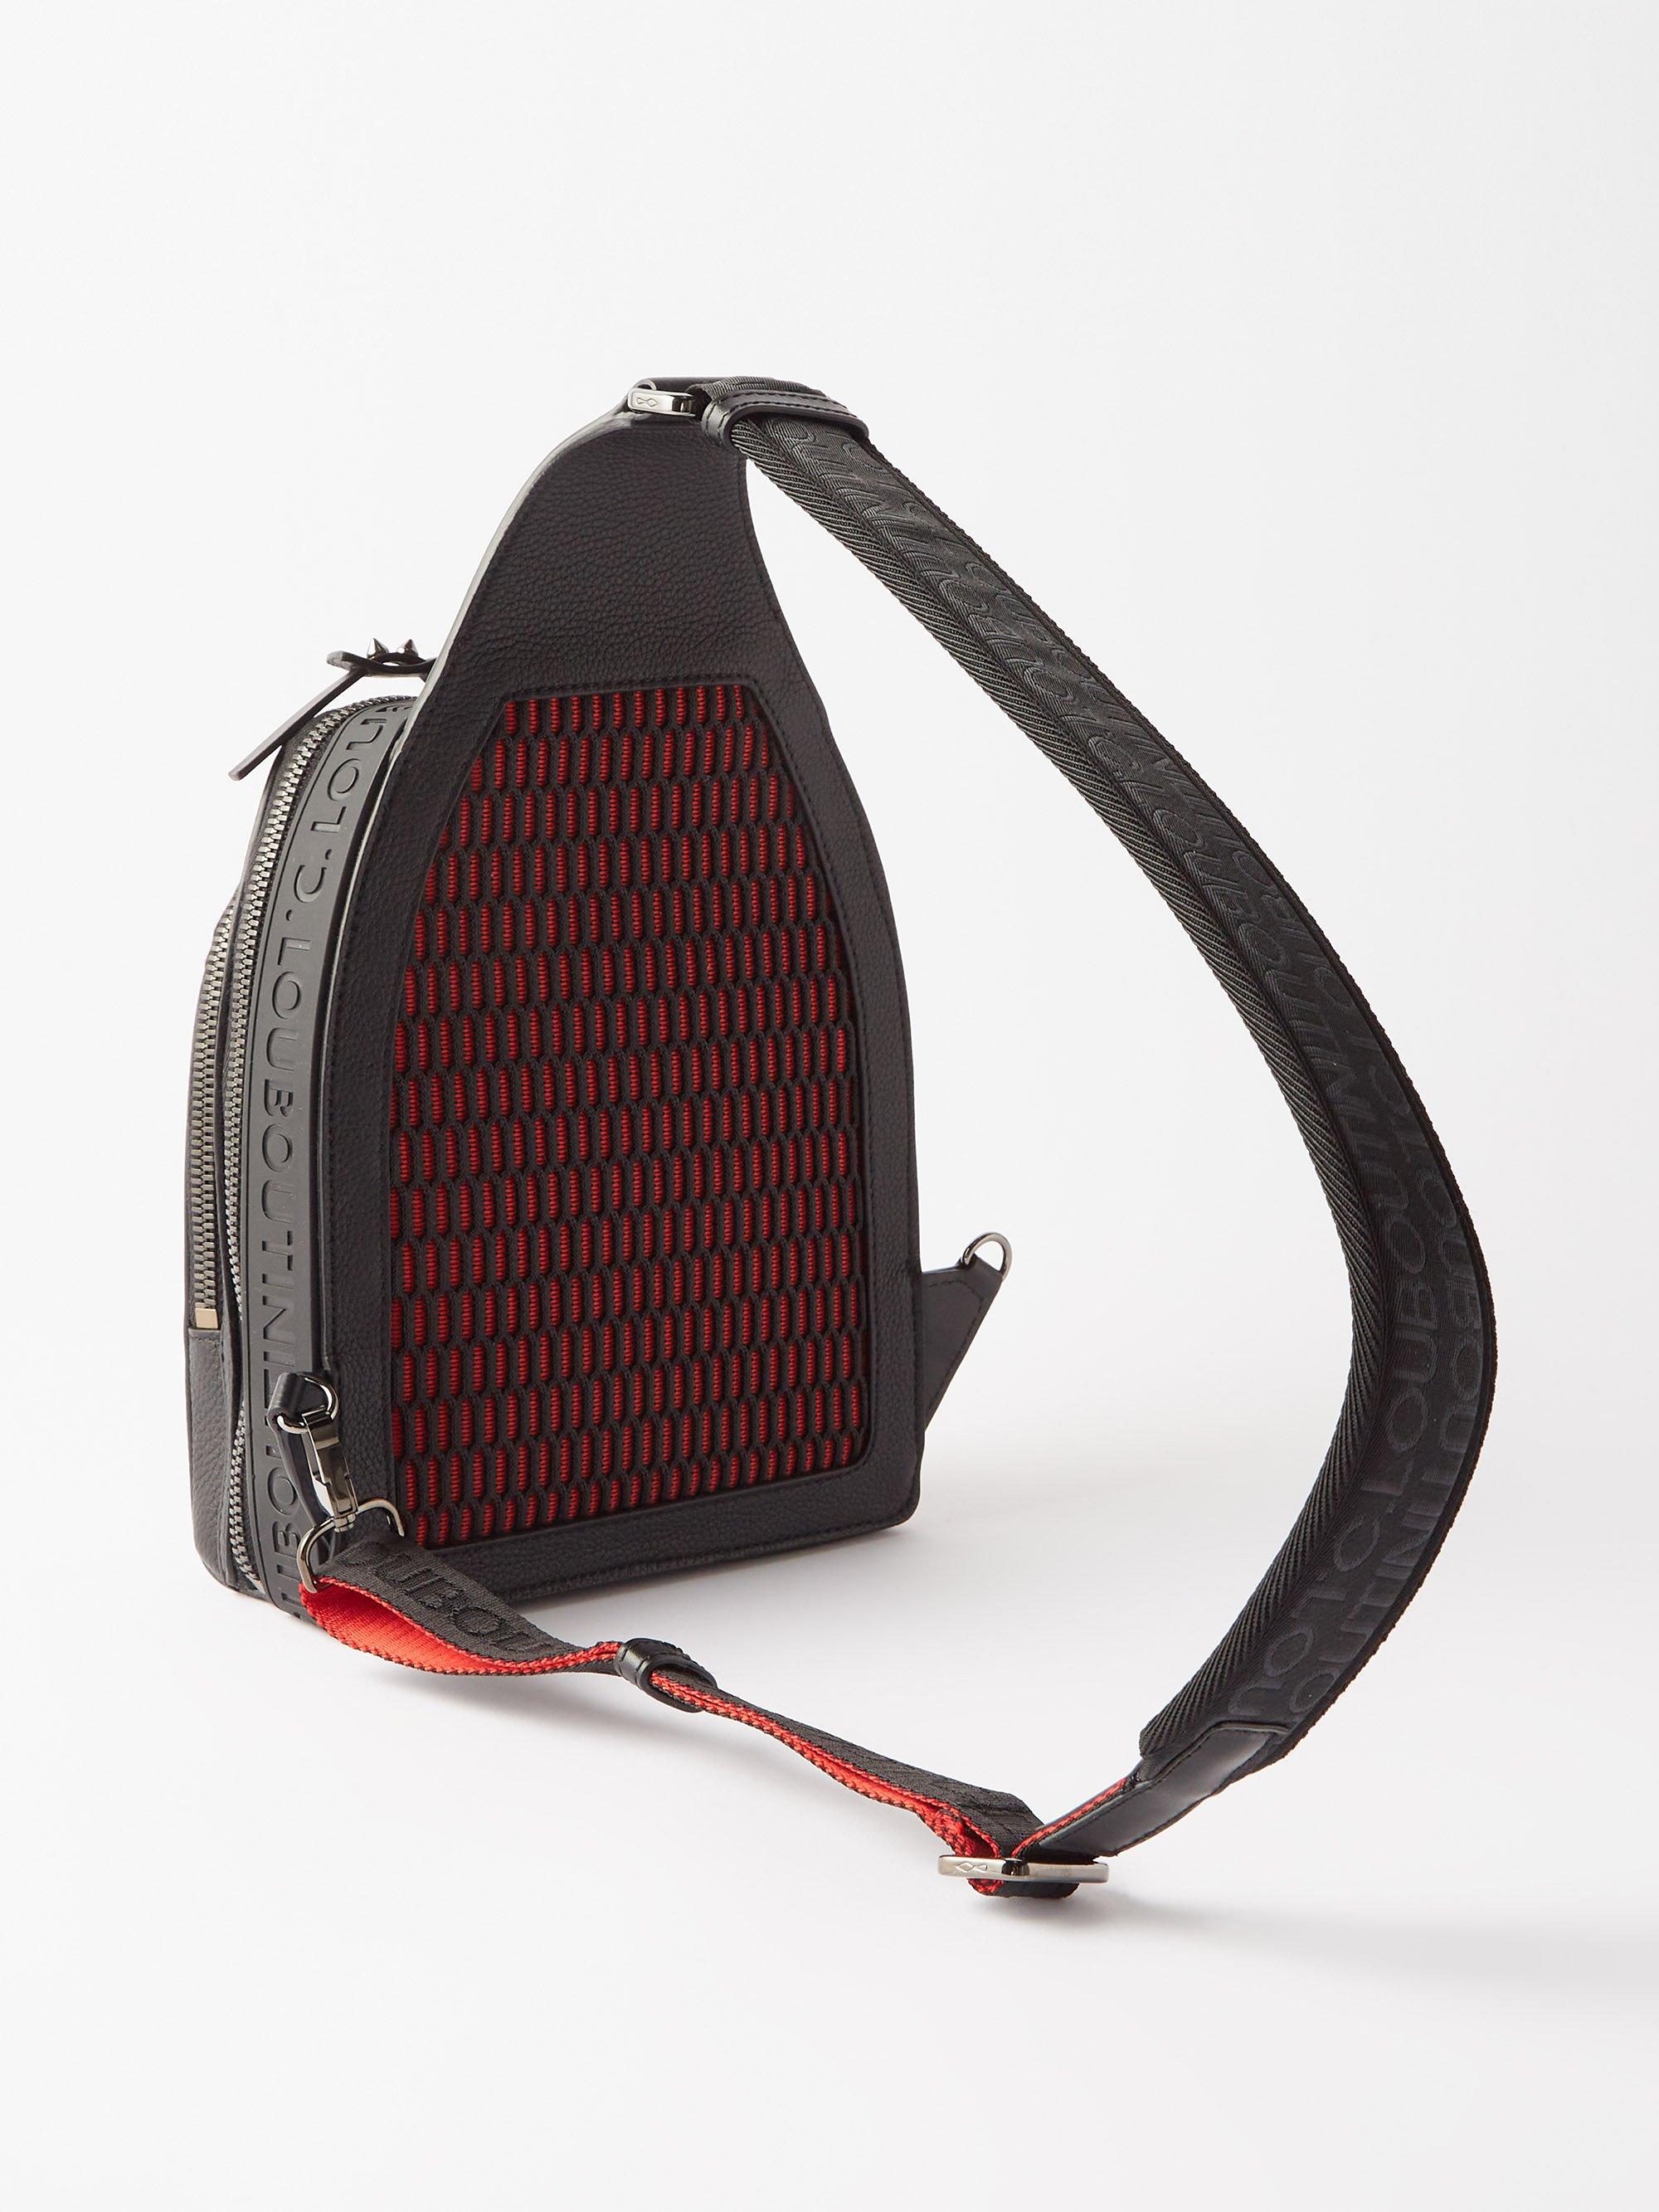 Christian Louboutin Loubifunk Spiked Leather Backpack in Black for Men